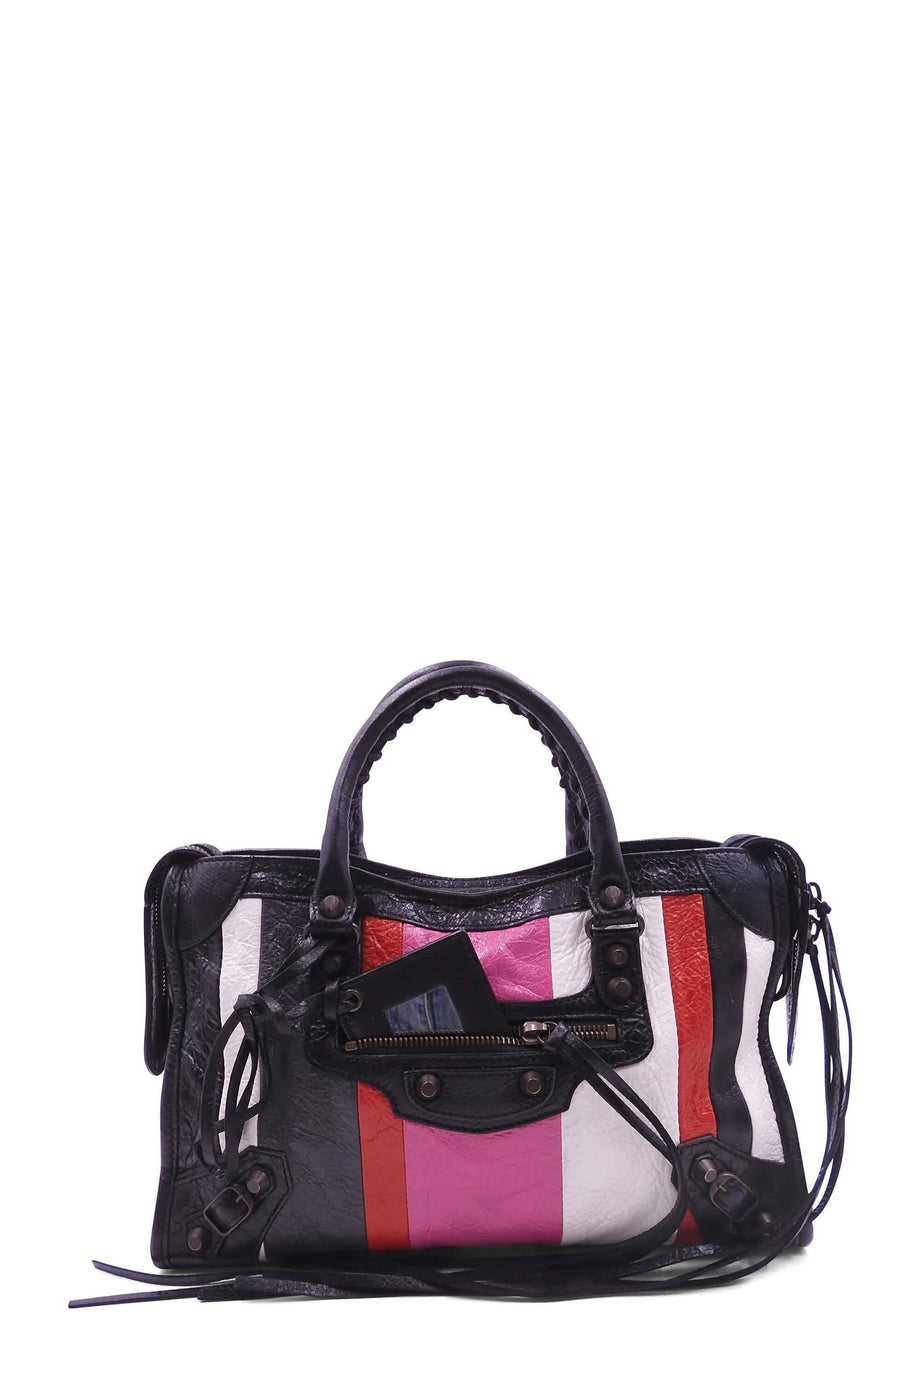 Buy Classic City Bags  Balenciaga from Second Edit by Style Theory